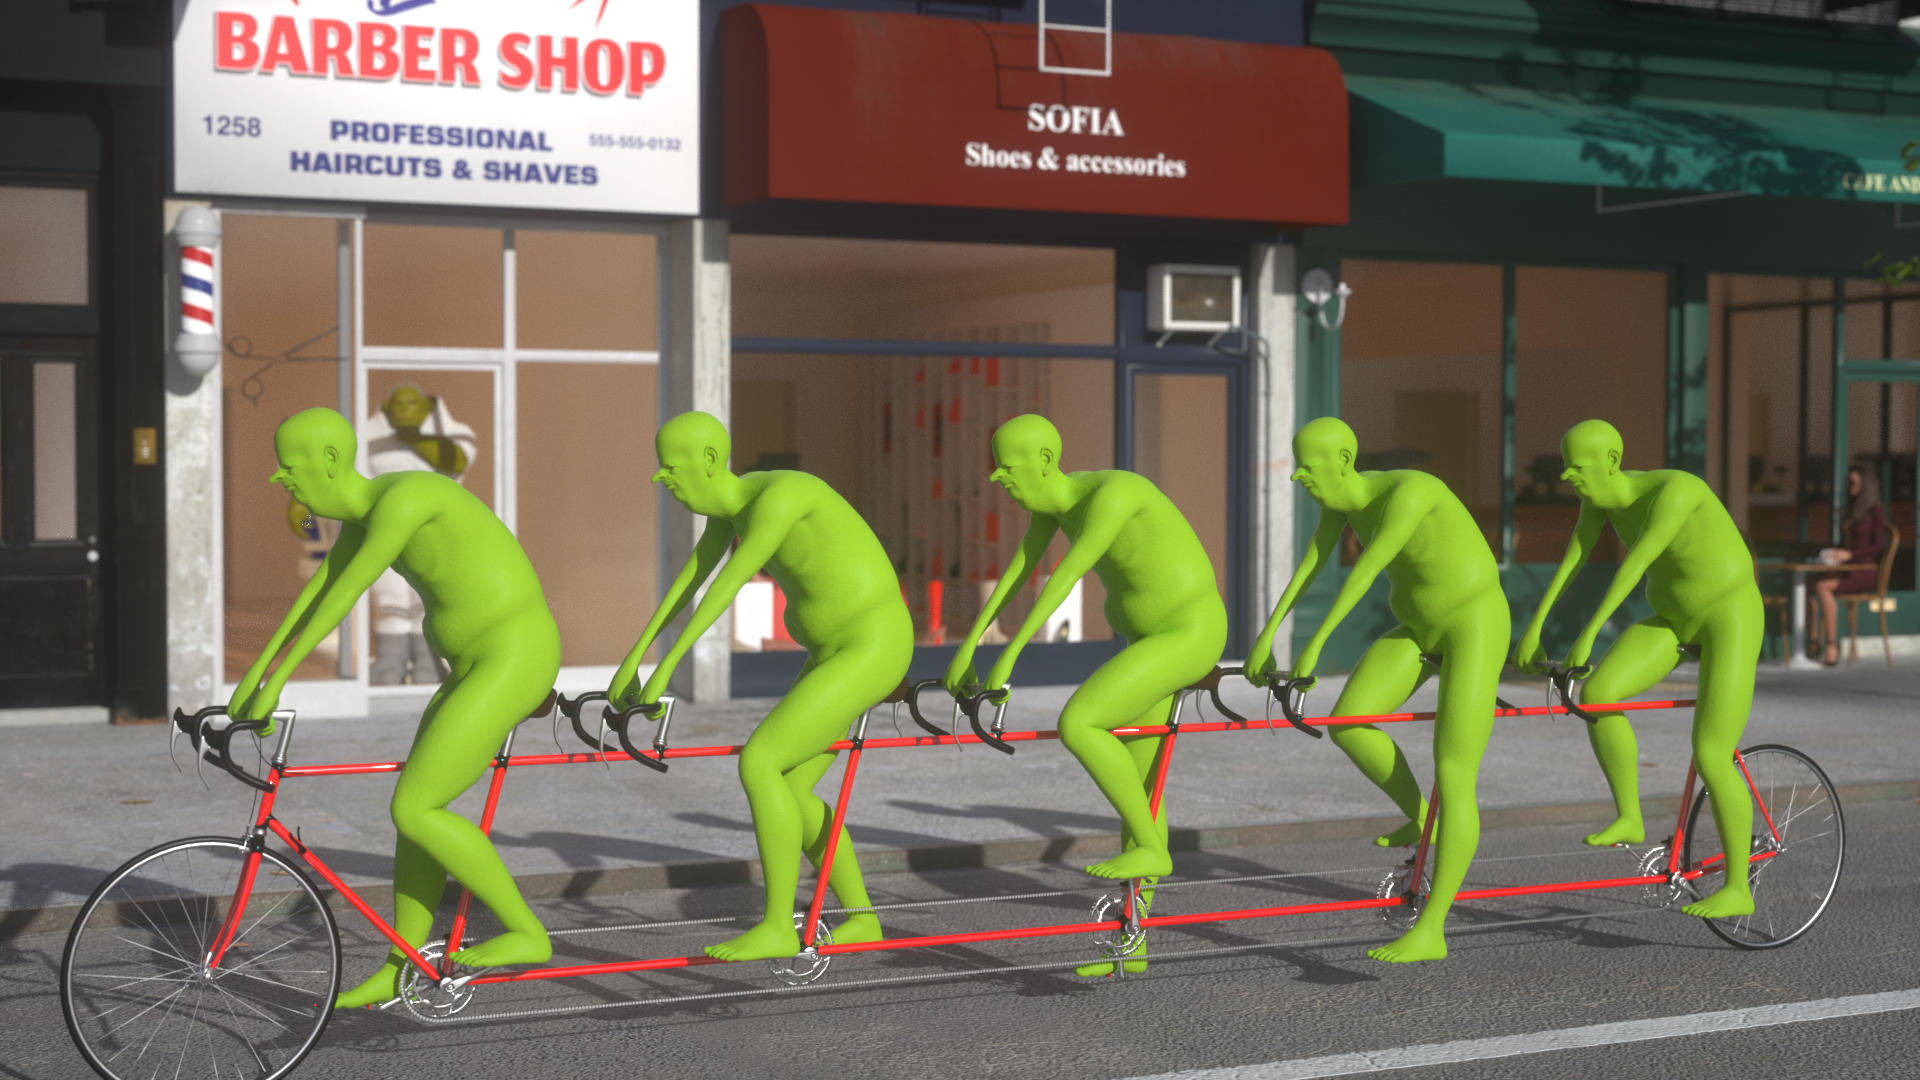 A still from an animation shows 5 bright green bald cyclists riding a red five seater bicycle along a street.